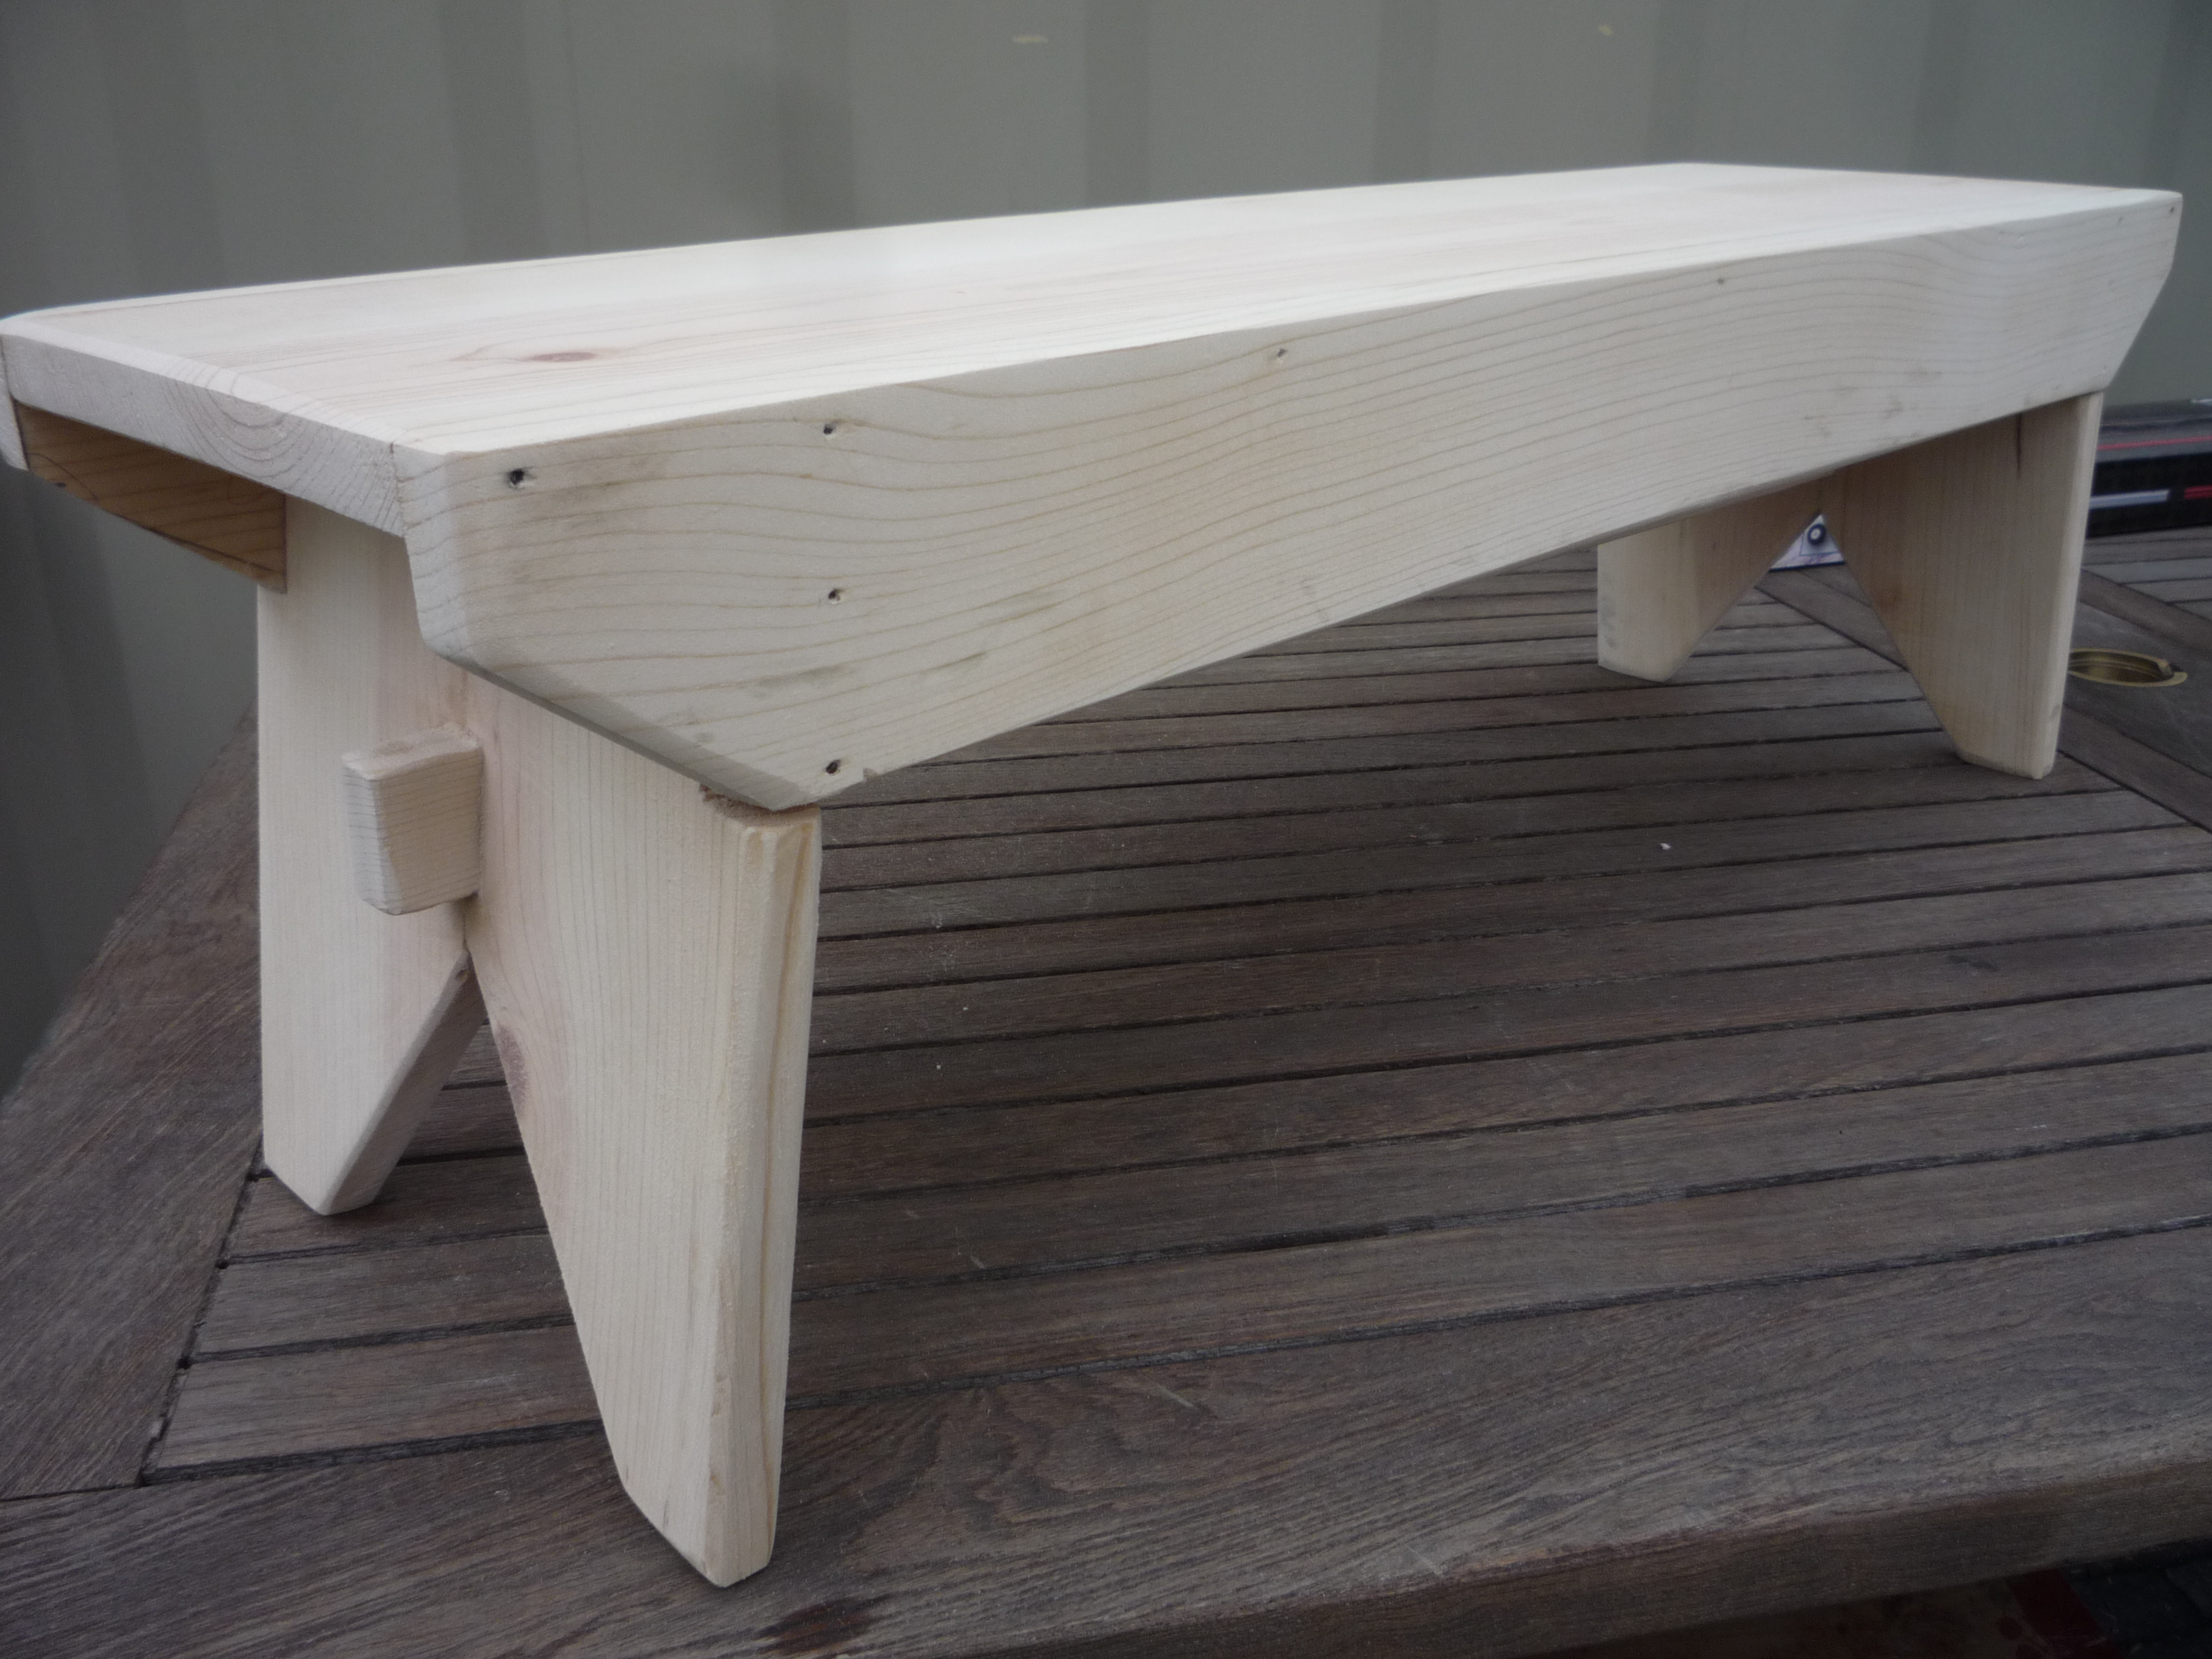 How To Make A Simple Wood Bench | Good Woodworking Projects